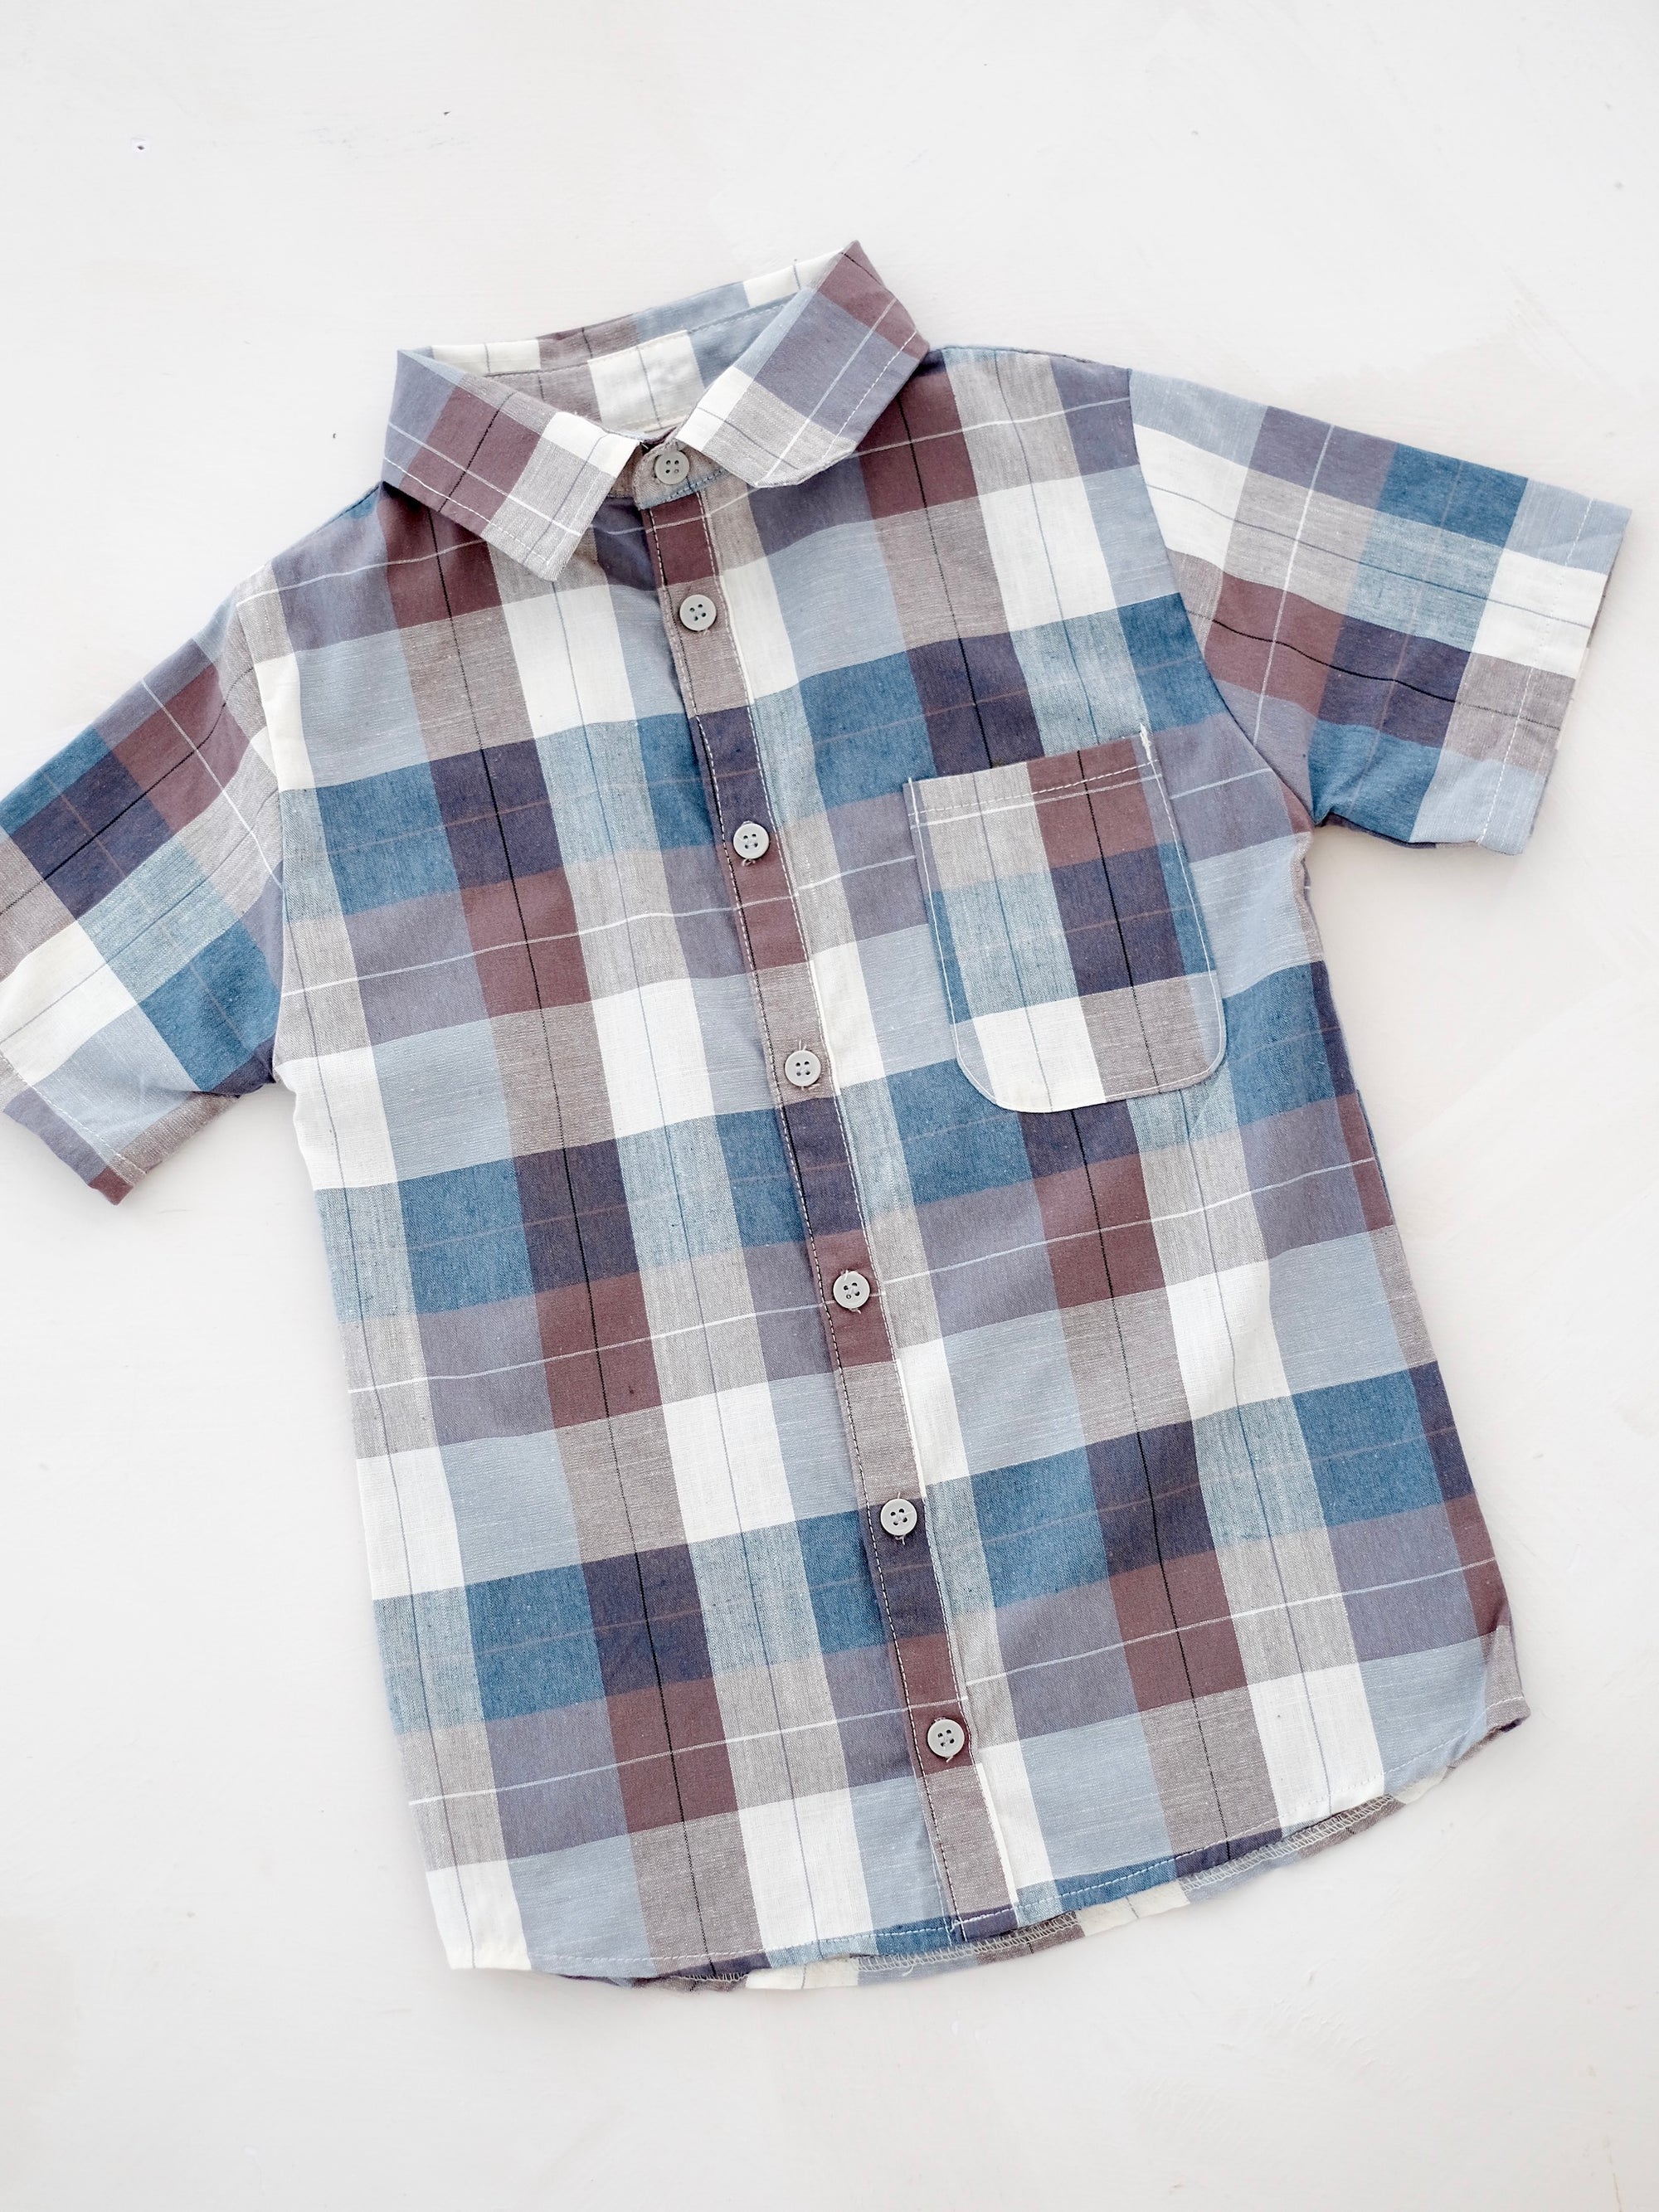 Short-sleeved Shirt | For matching with Corbin